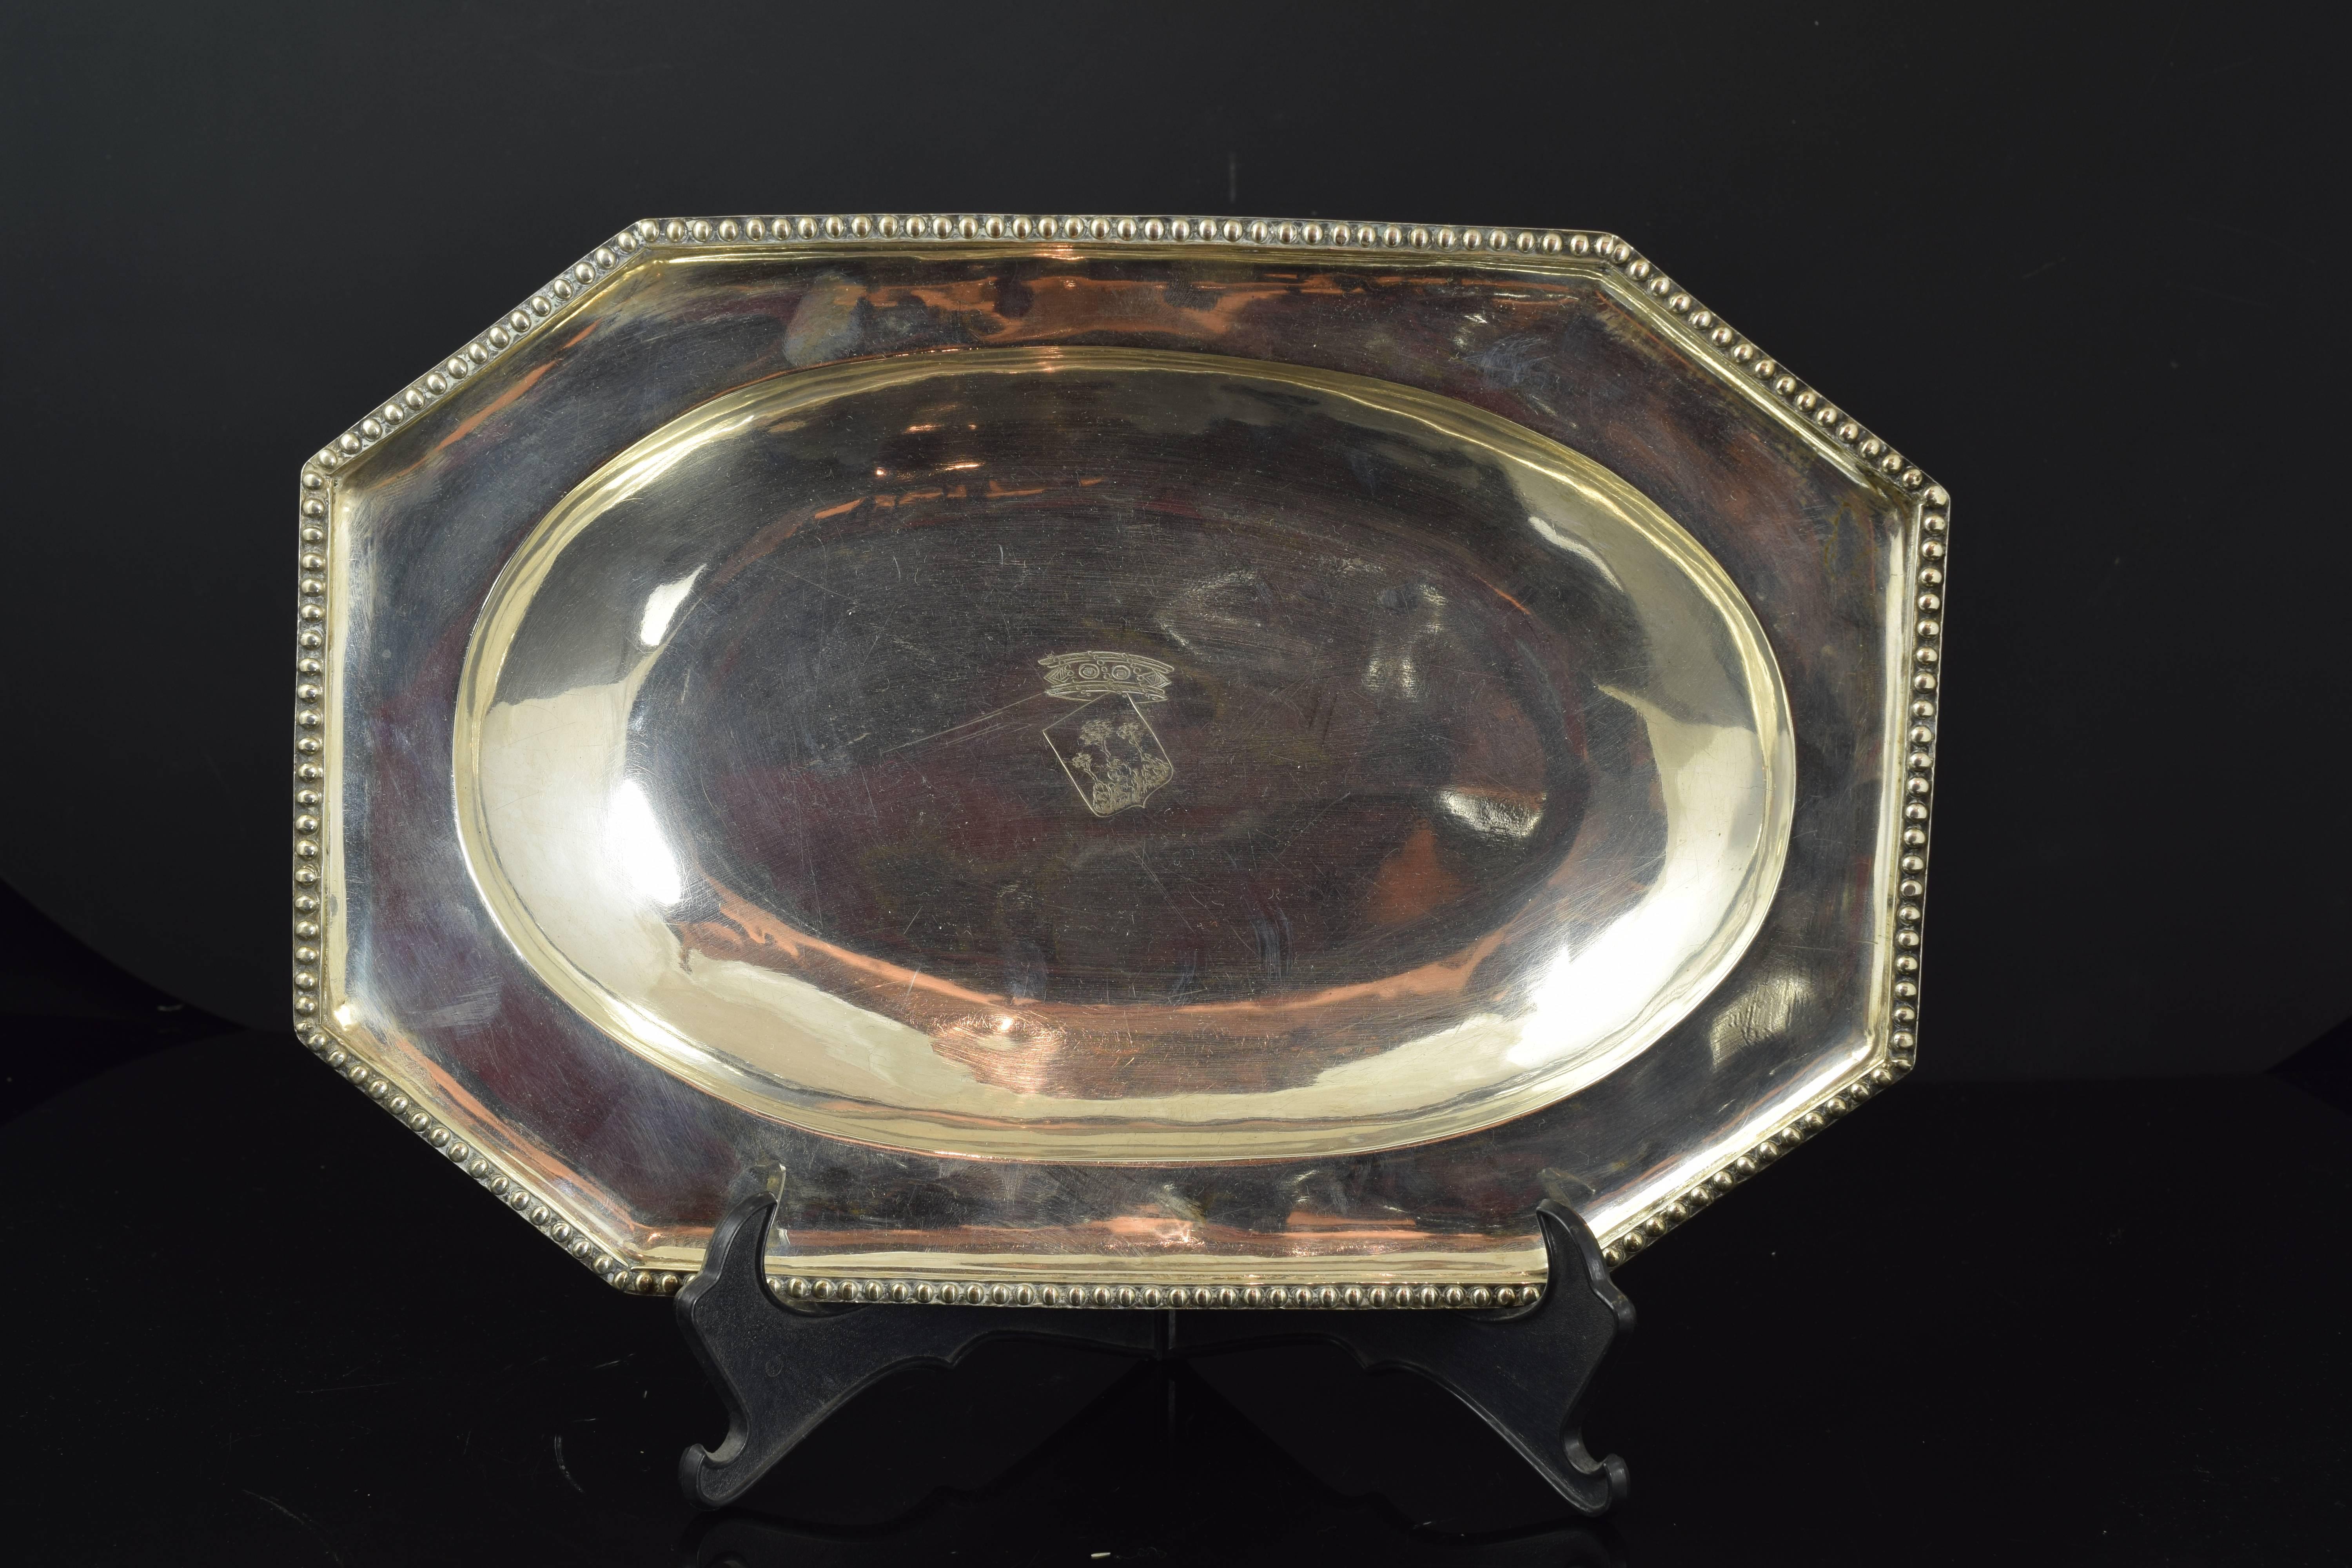 Solid silver tray. Barcelona, Spain, 18th century.
With hallmarks.
Solid silver tray with a octagonal exterior remarked with a thin band of pearls in relief and a oval interior in the upper part of the piece. It also shows and engraved heraldic